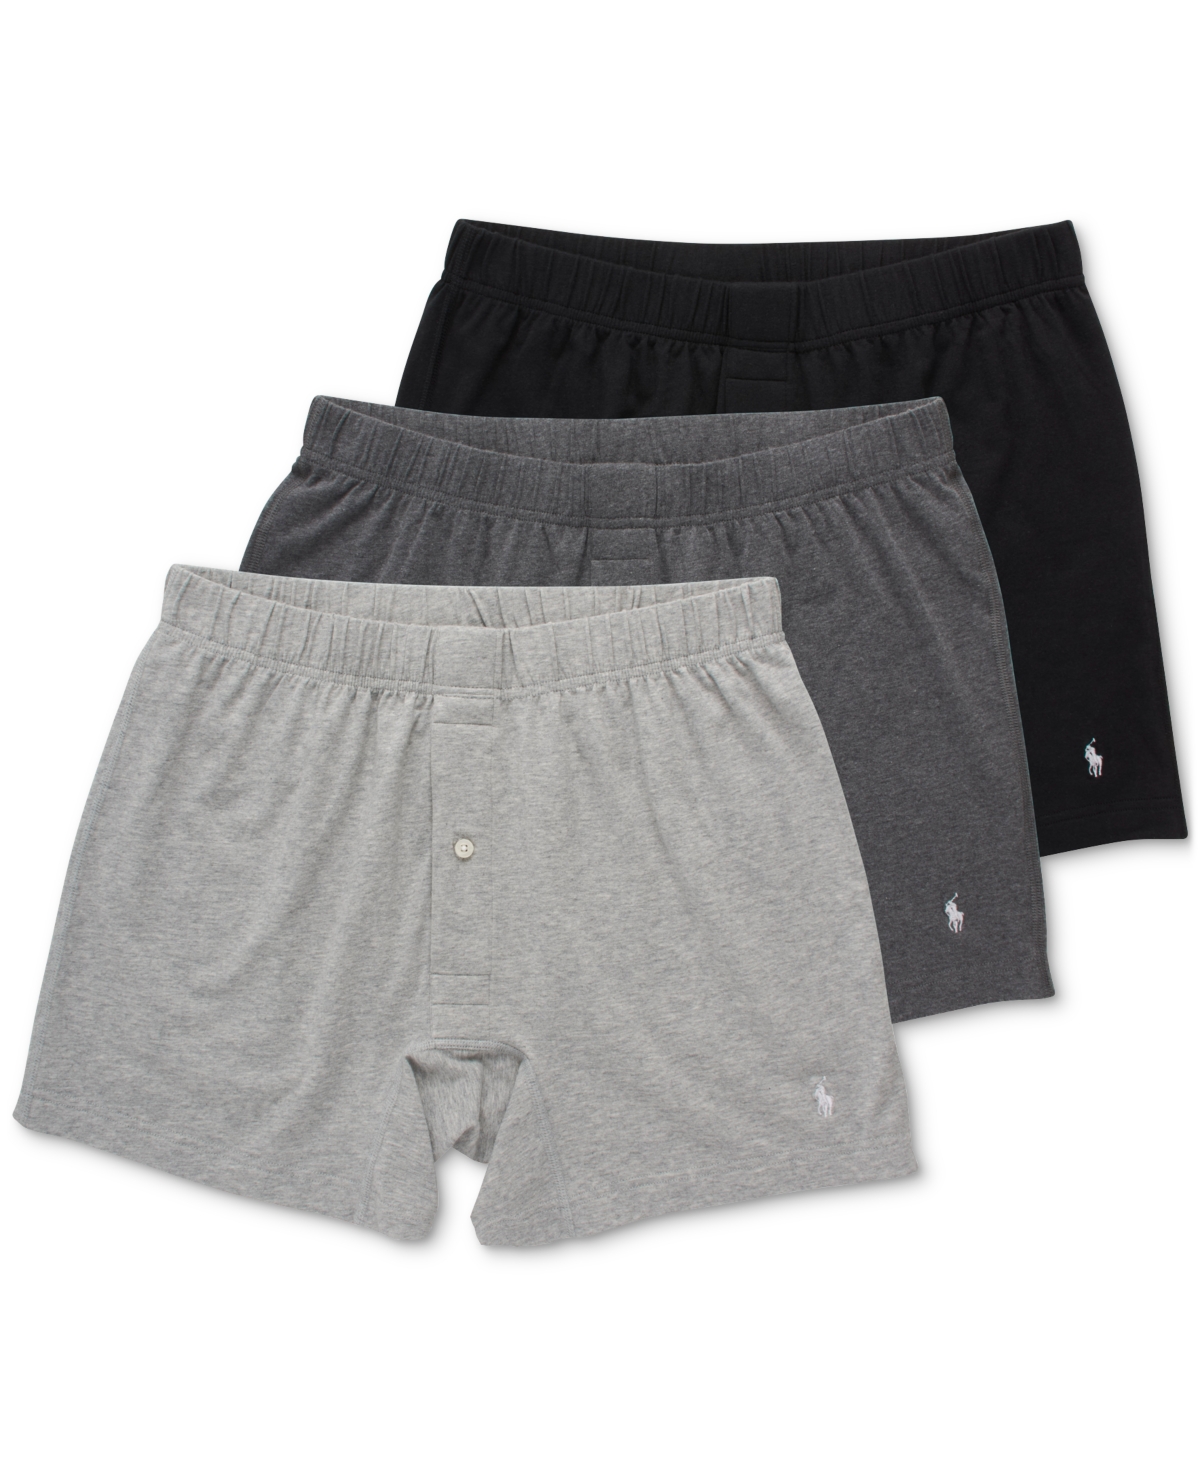 Polo Ralph Lauren Men's 3-pack Classic Stretch Knit Boxers In Polo Black Assorted